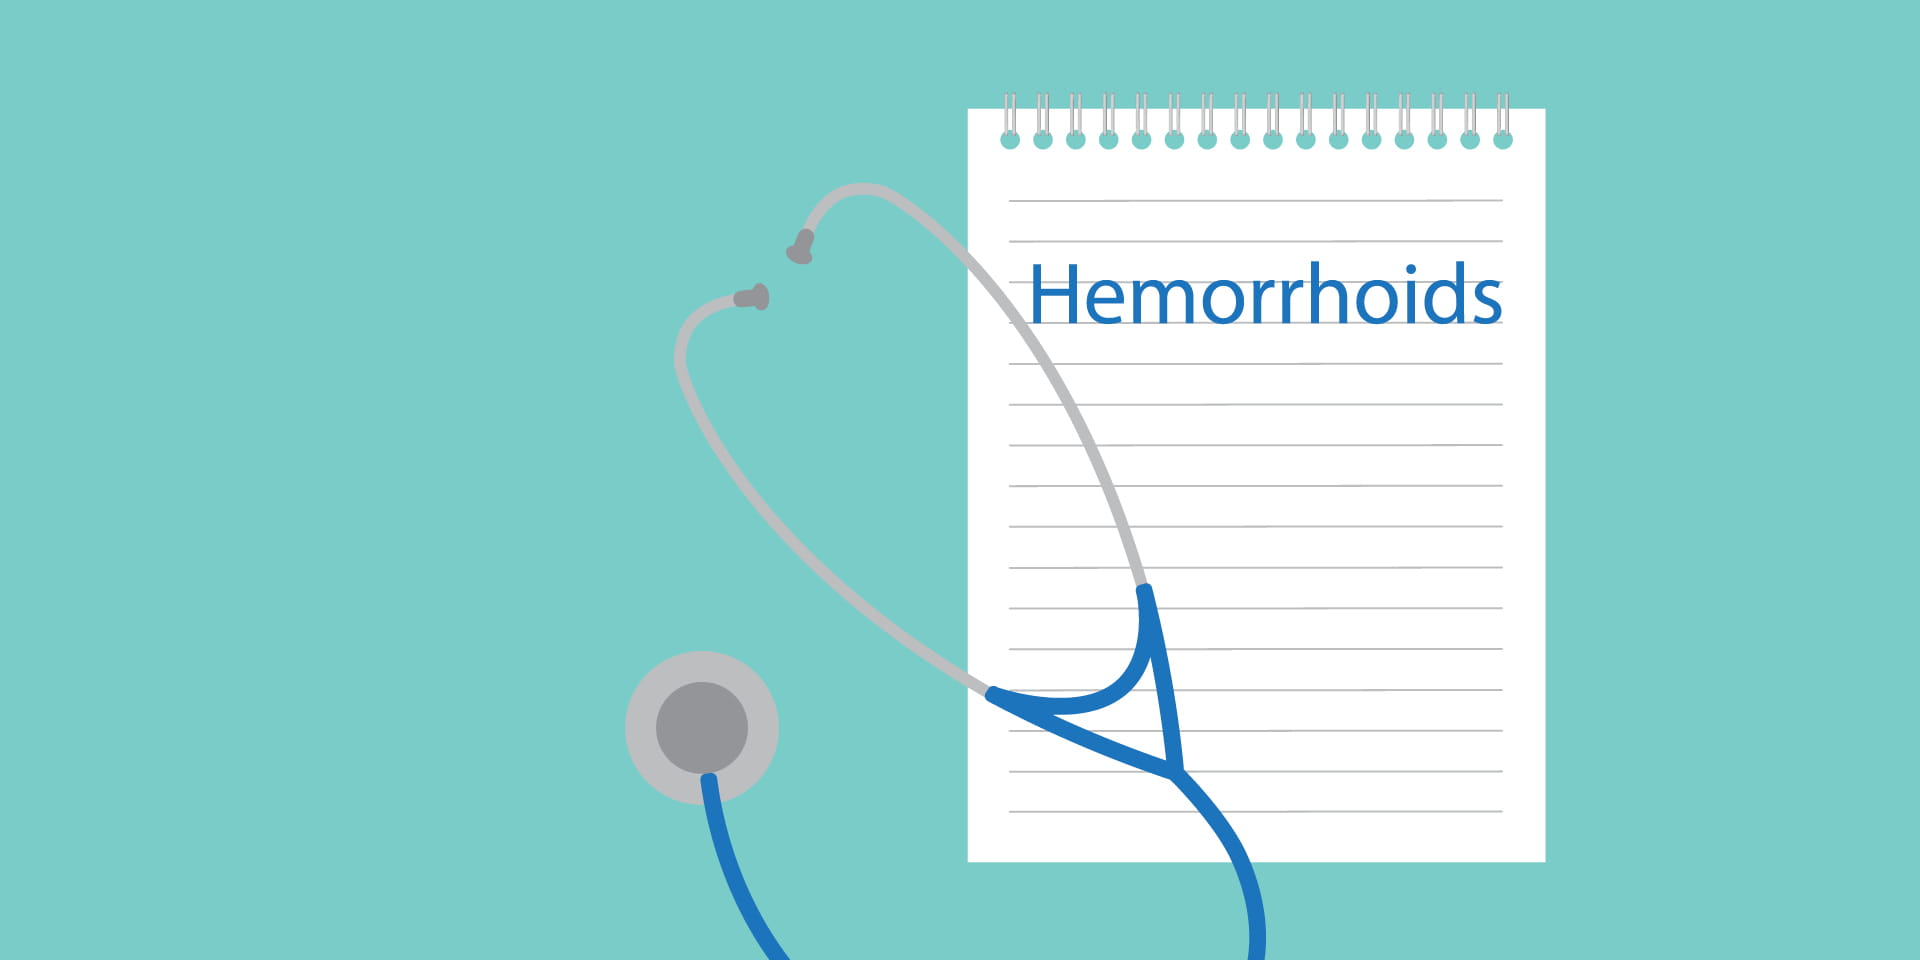 vector image of hemorrhoids written on clipboard next to stethoscope